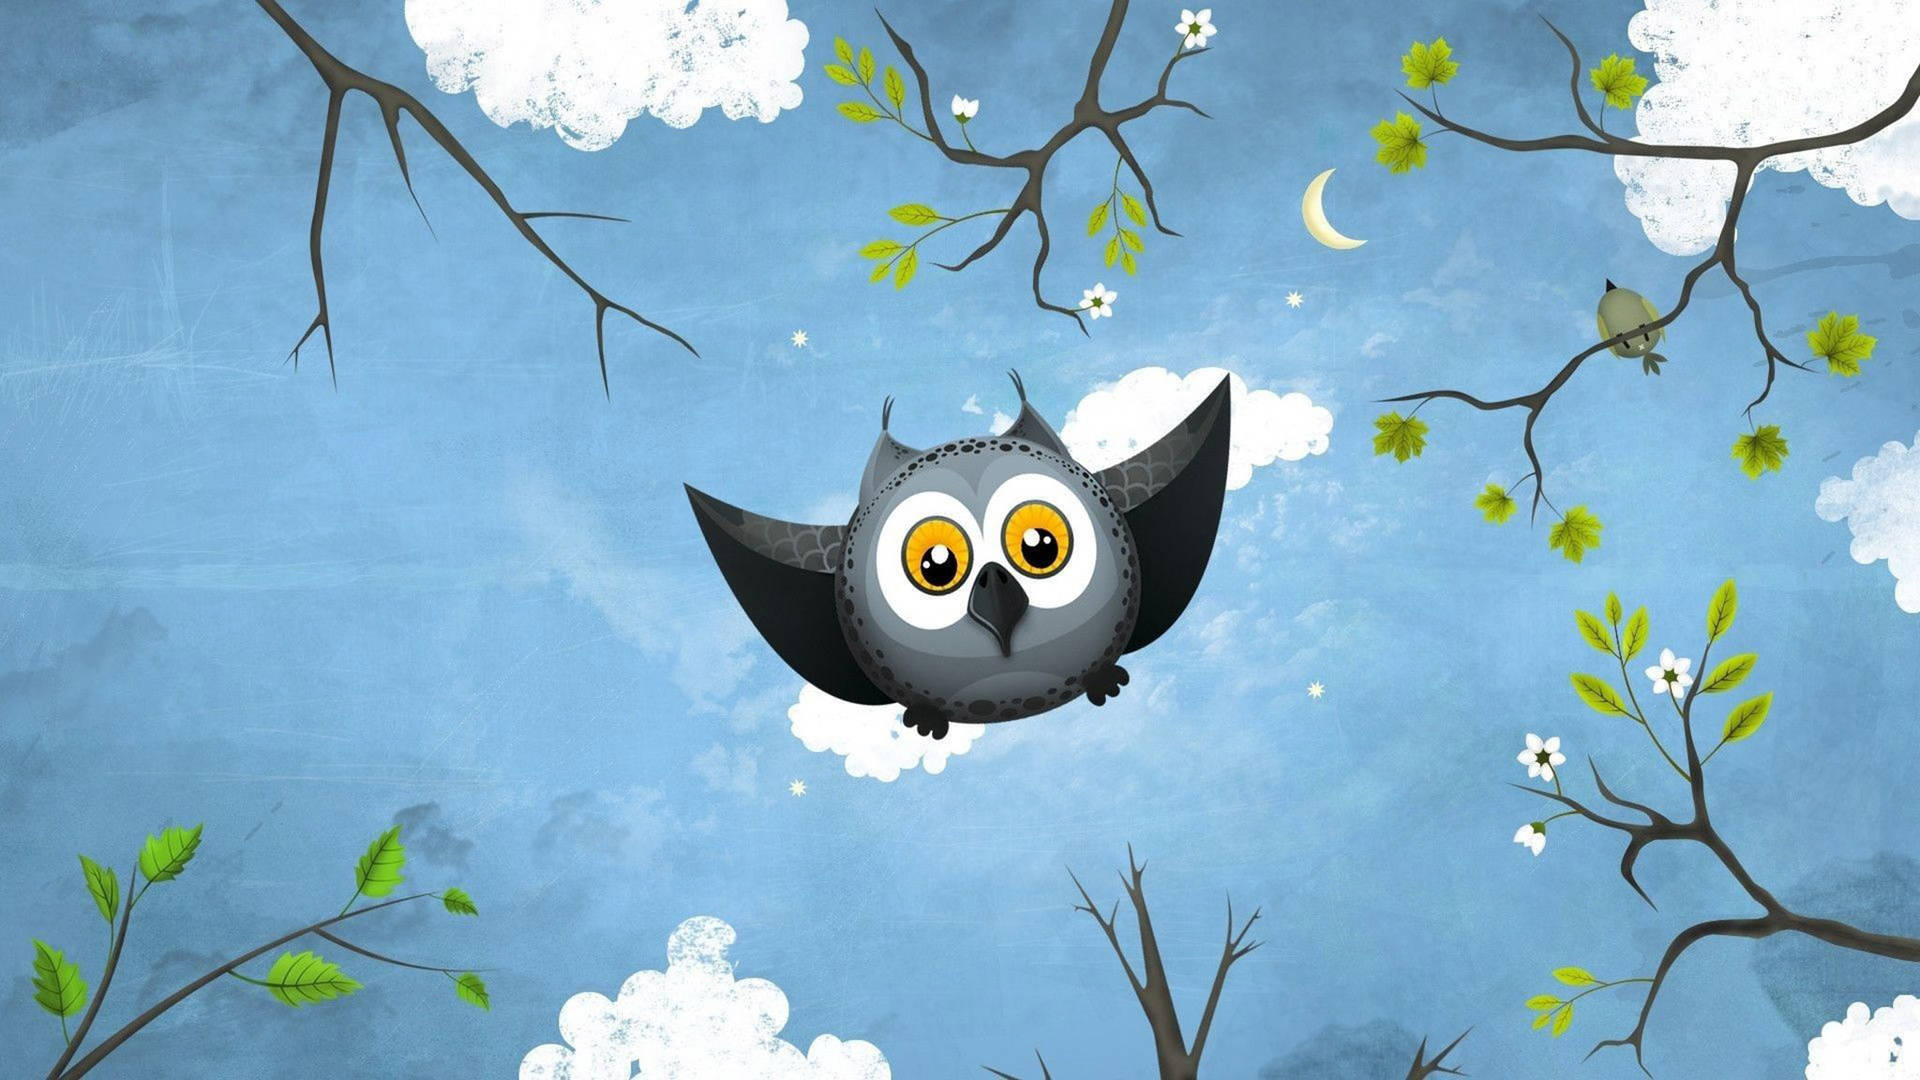 Free Cute Owl Wallpaper Downloads, [100+] Cute Owl Wallpapers for FREE |  